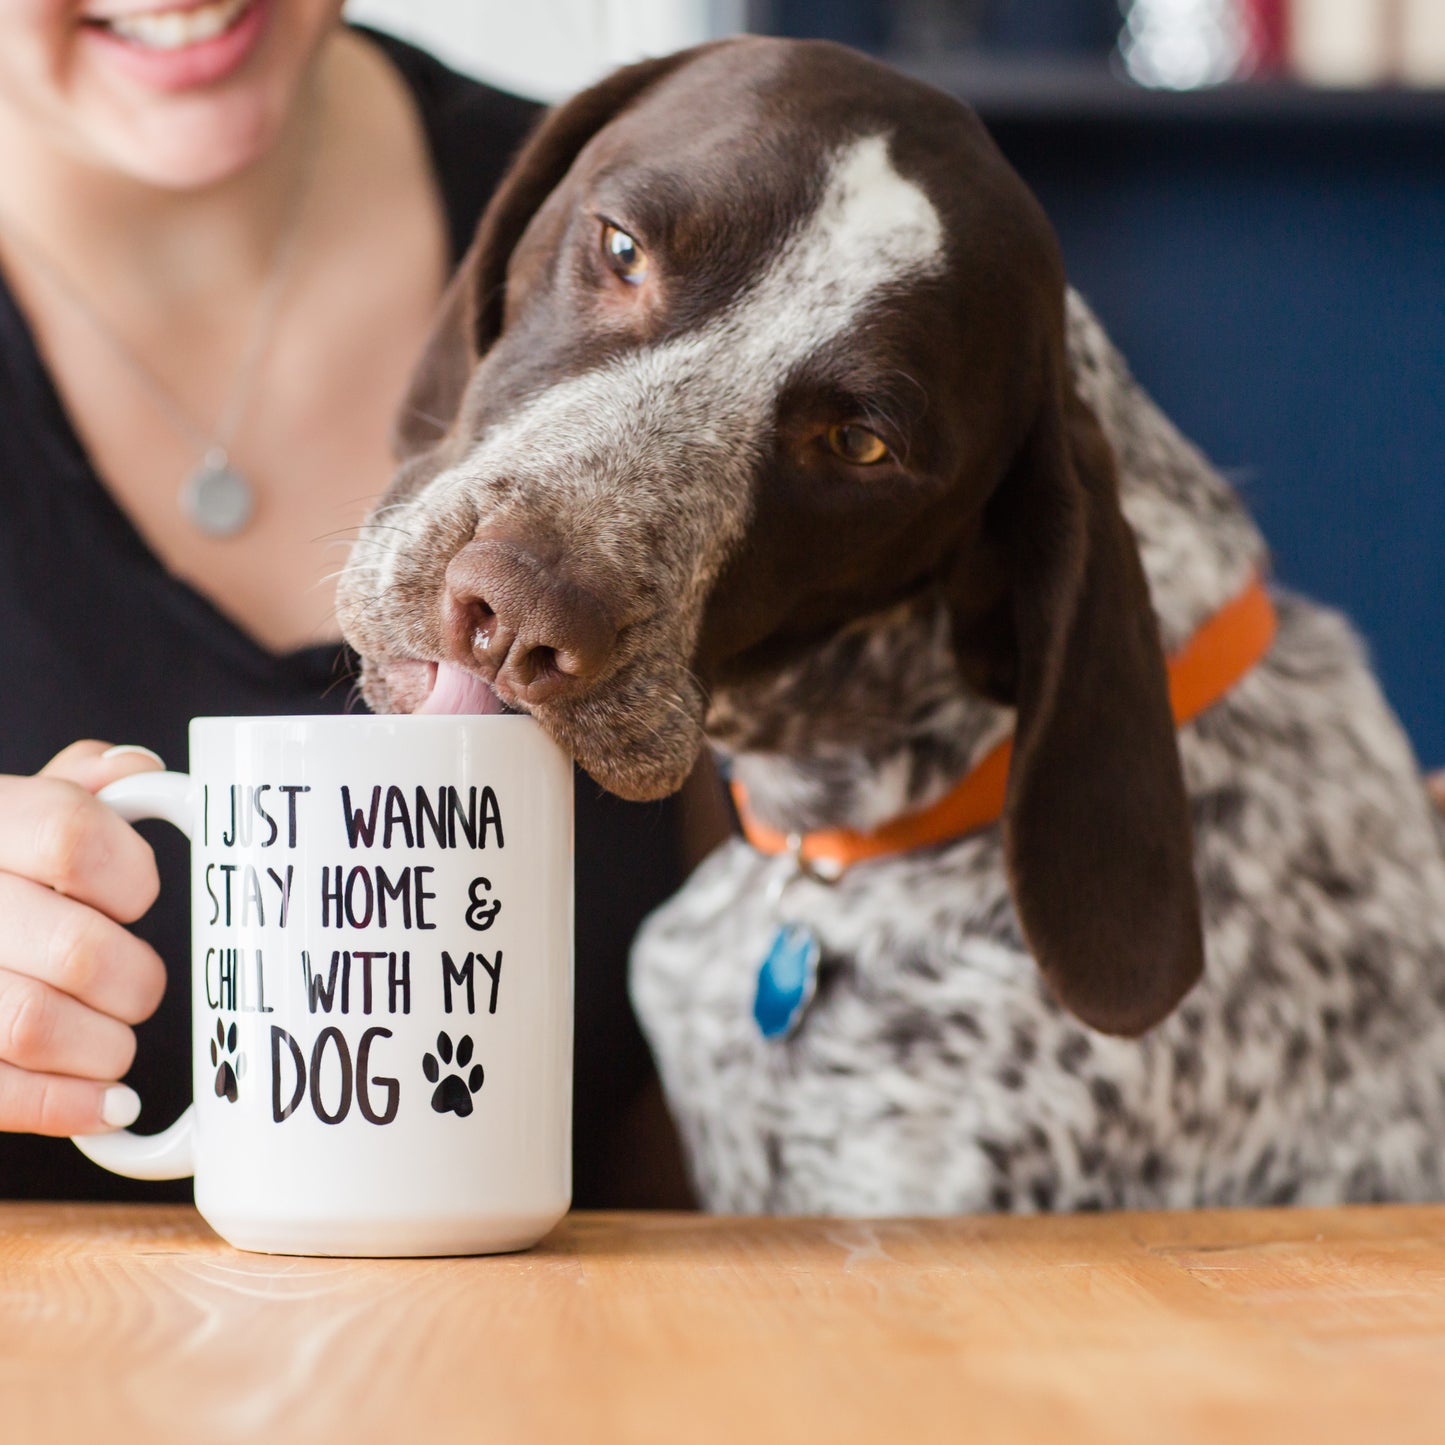 Just Wanna Stay Home and Chill With My Dog Mug